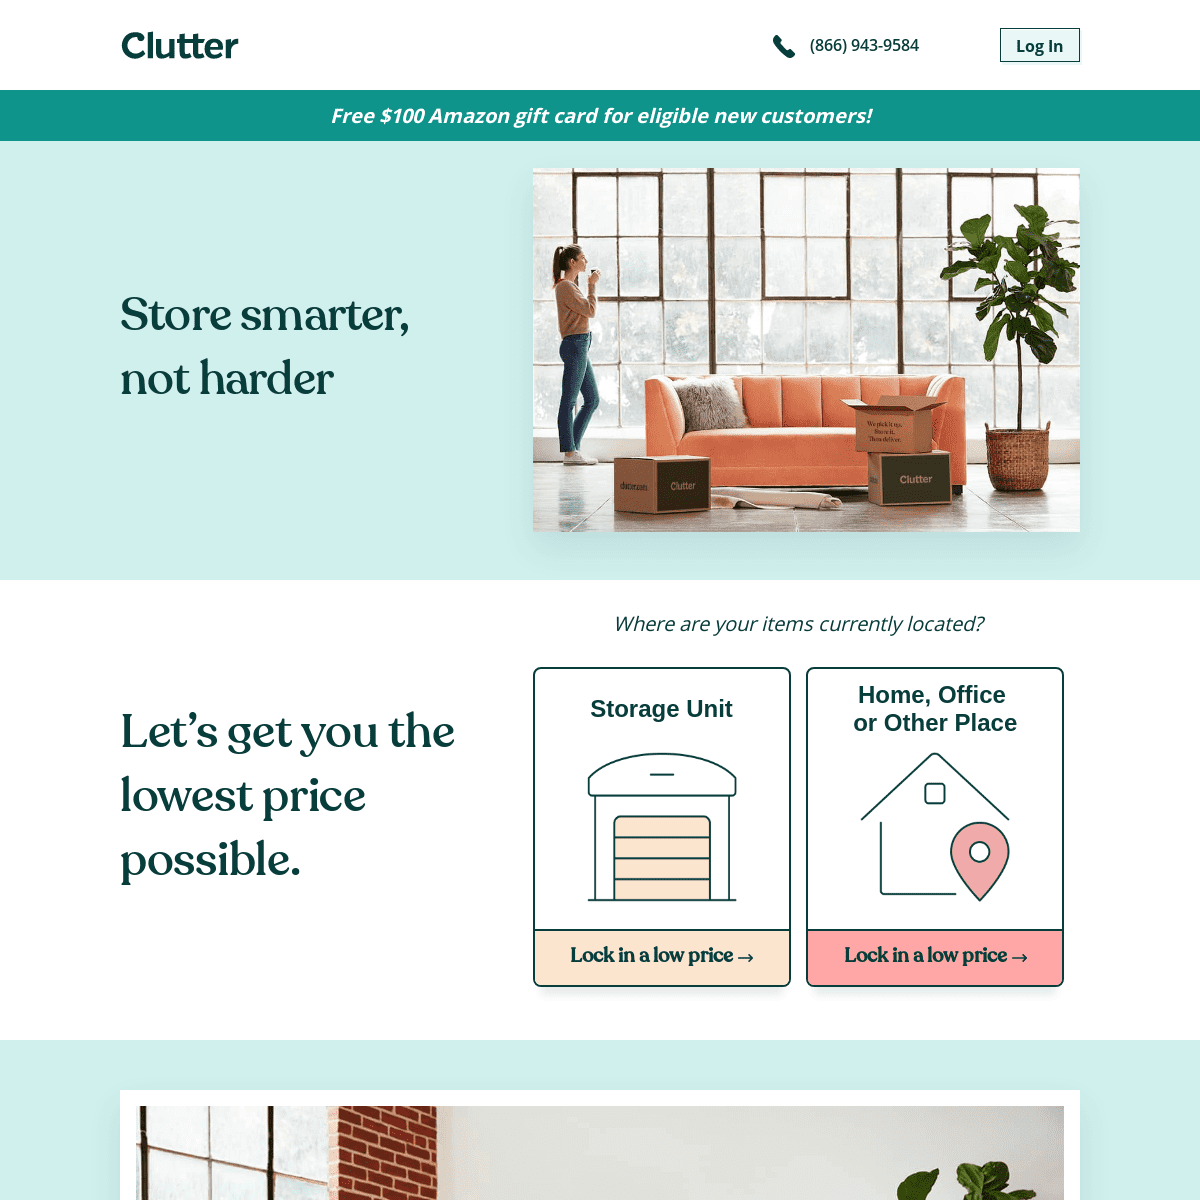 A complete backup of clutter.com